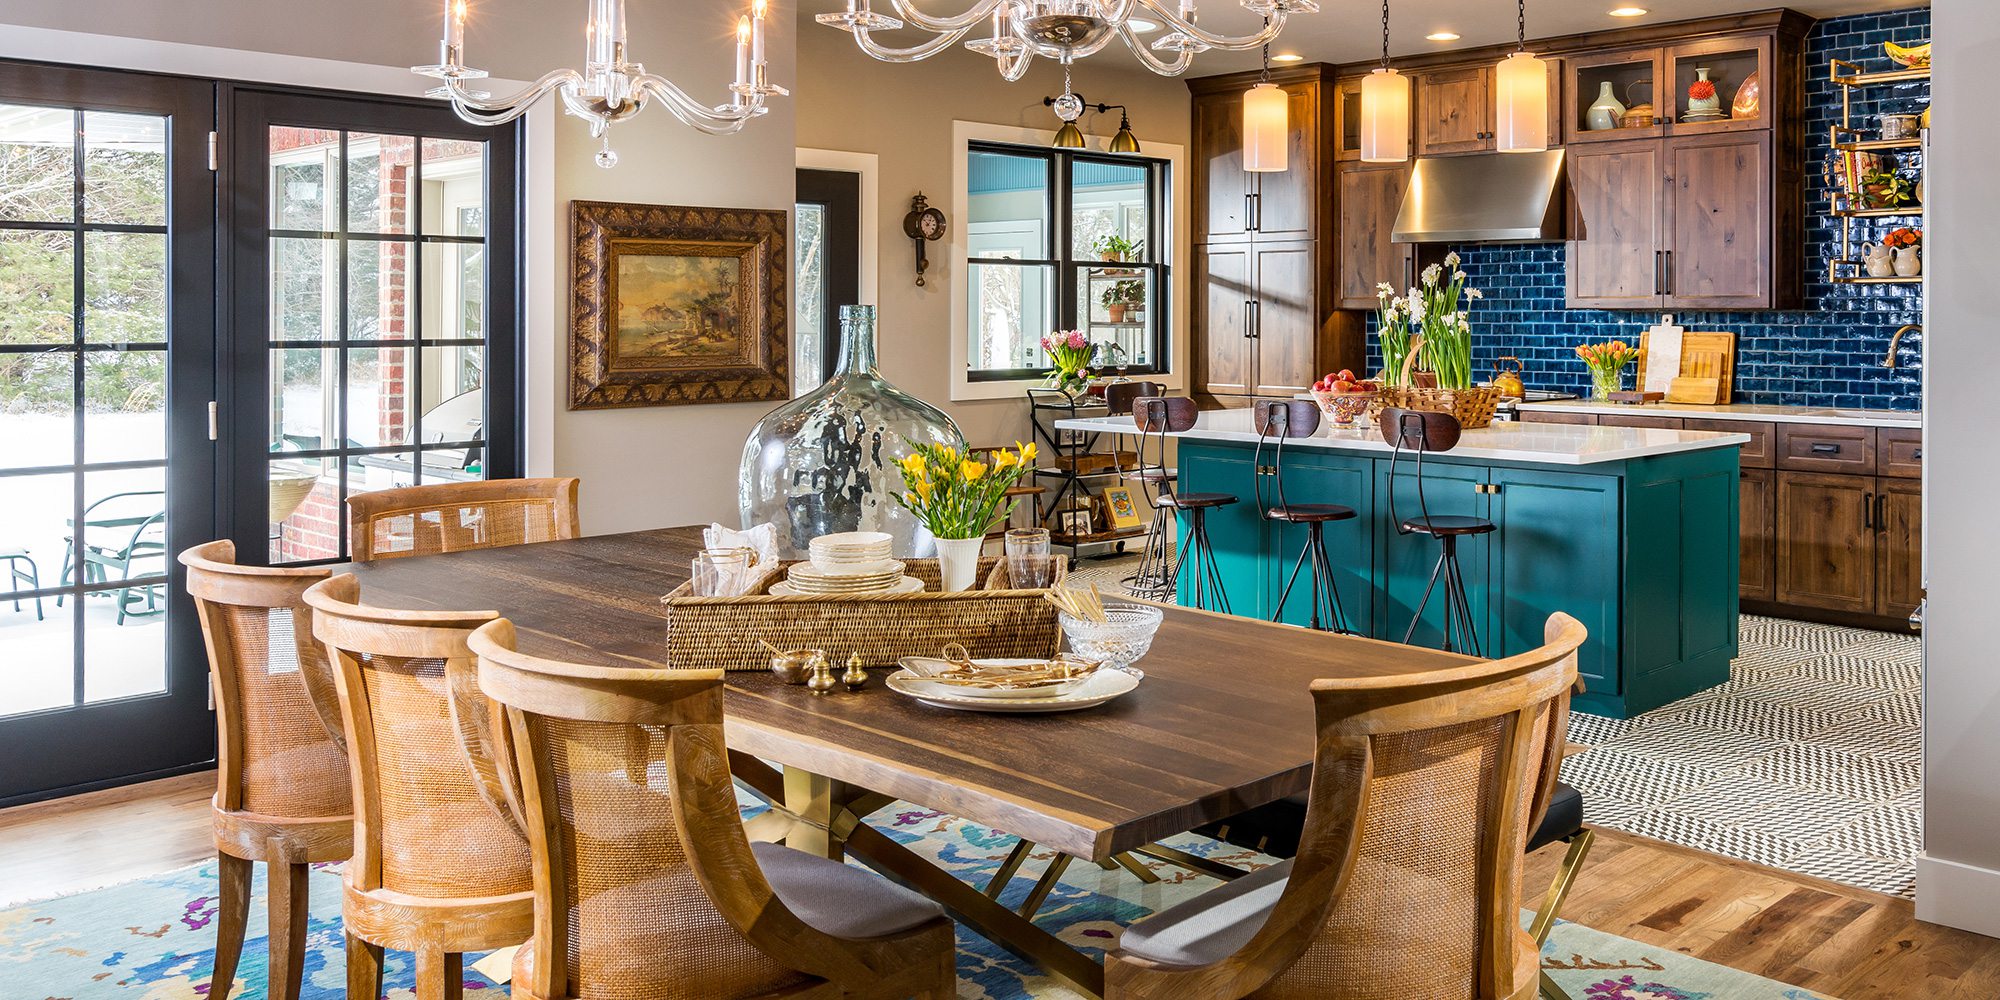 417 Home Design Awards 2020 Winner of Best Dining Area by Obelisk Home Springfield MO